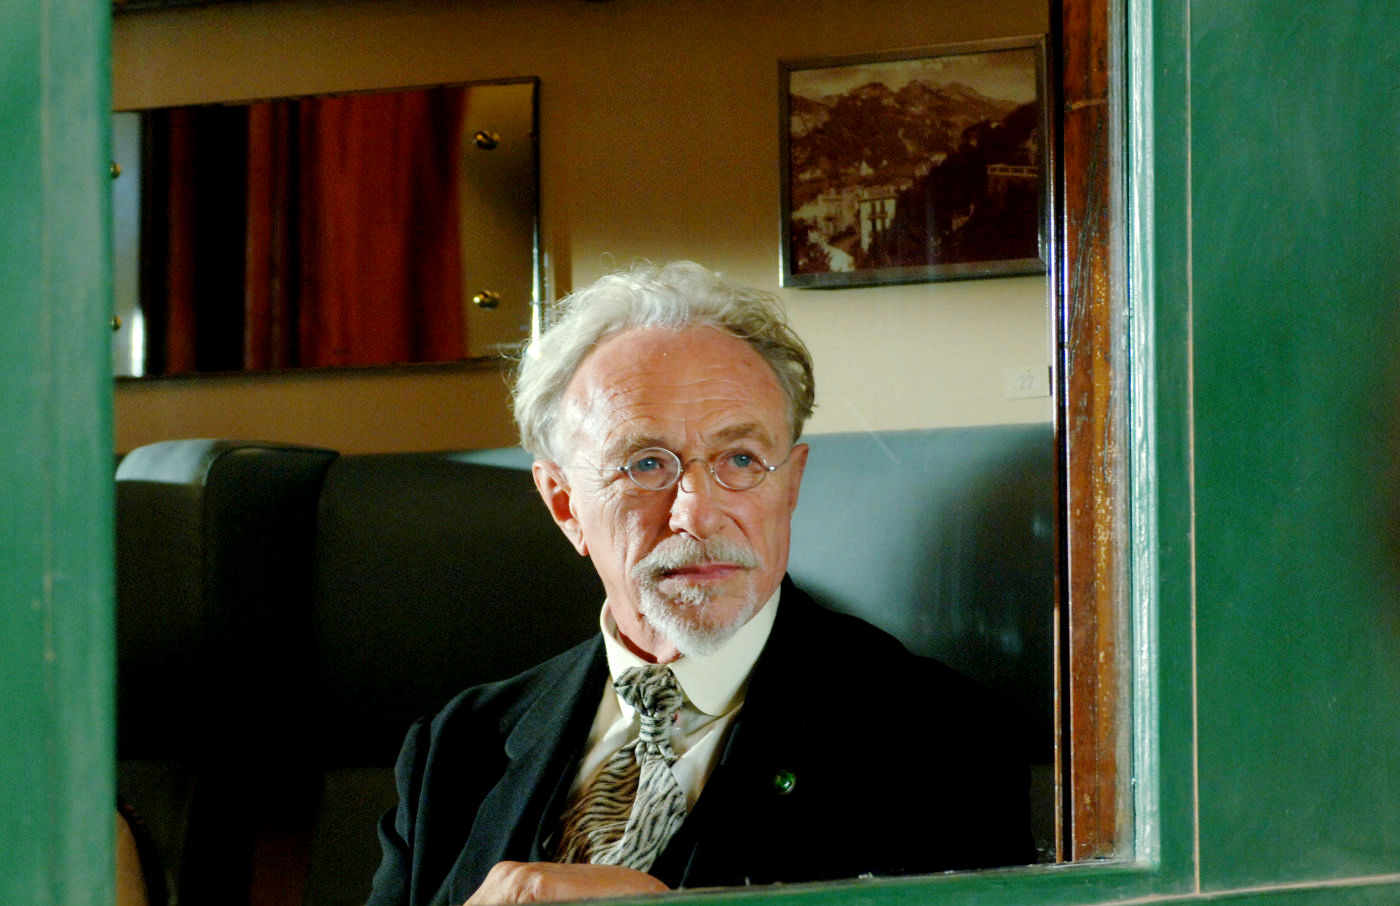 Pierre Richard stars as Monsieur TSF in Sony Pictures Classics' Paris 36 (2009)